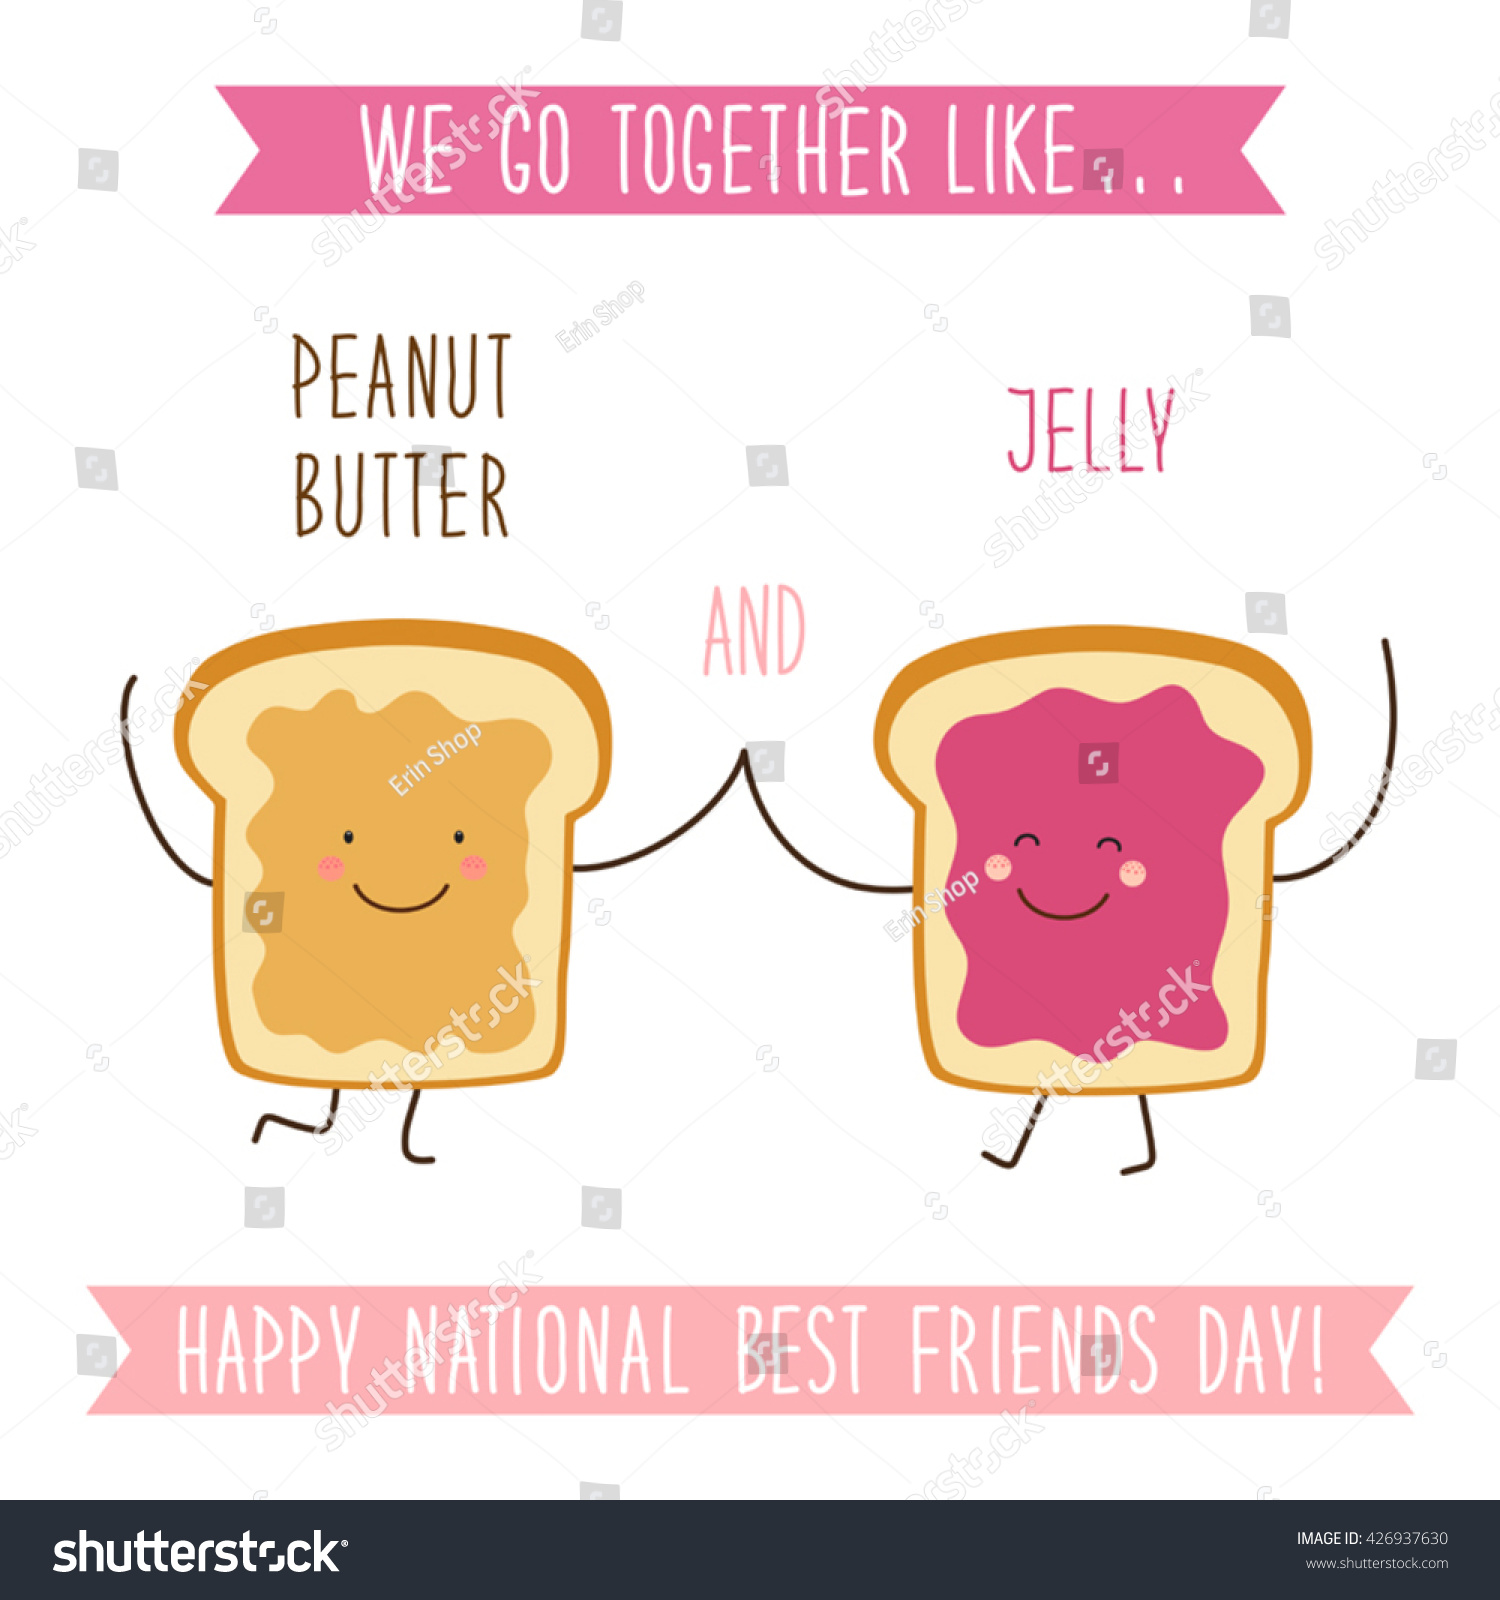 Cute Unusual National Best Friends Day Stock Vector Royalty Free